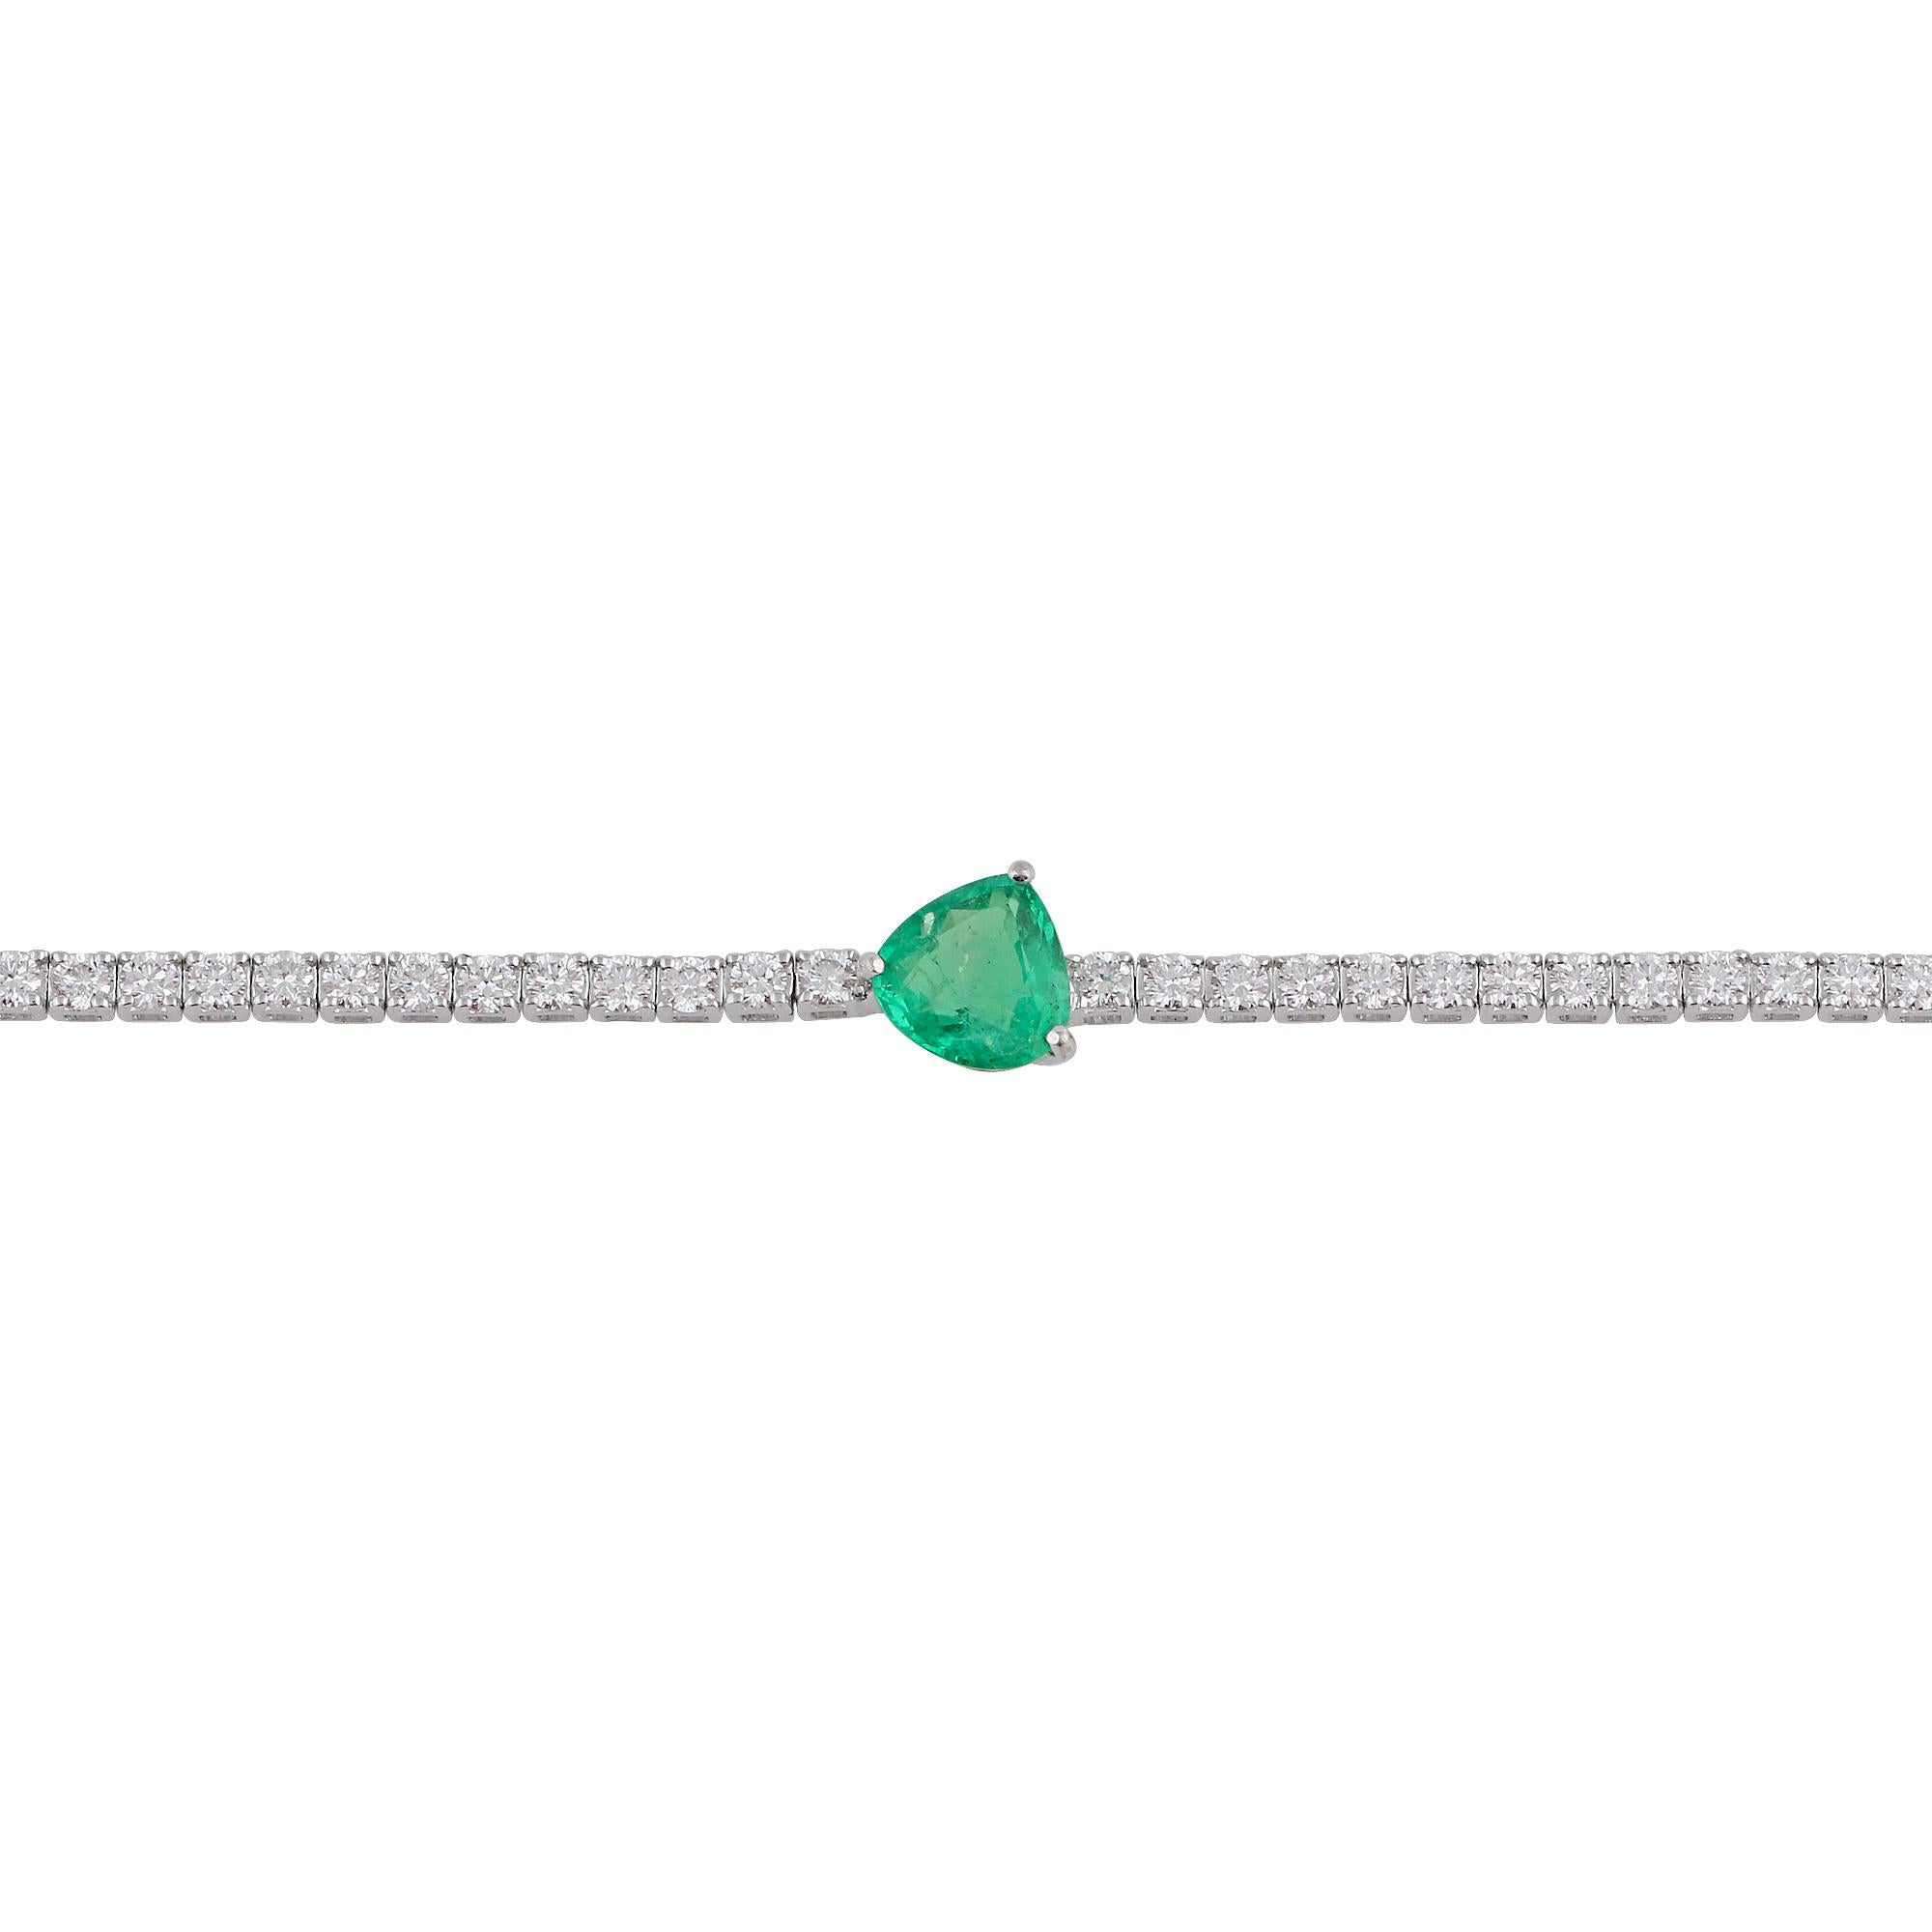 Modern Pear Natural Emerald Gemstone Bracelet Diamond Solid 18k White Gold Jewelry For Sale